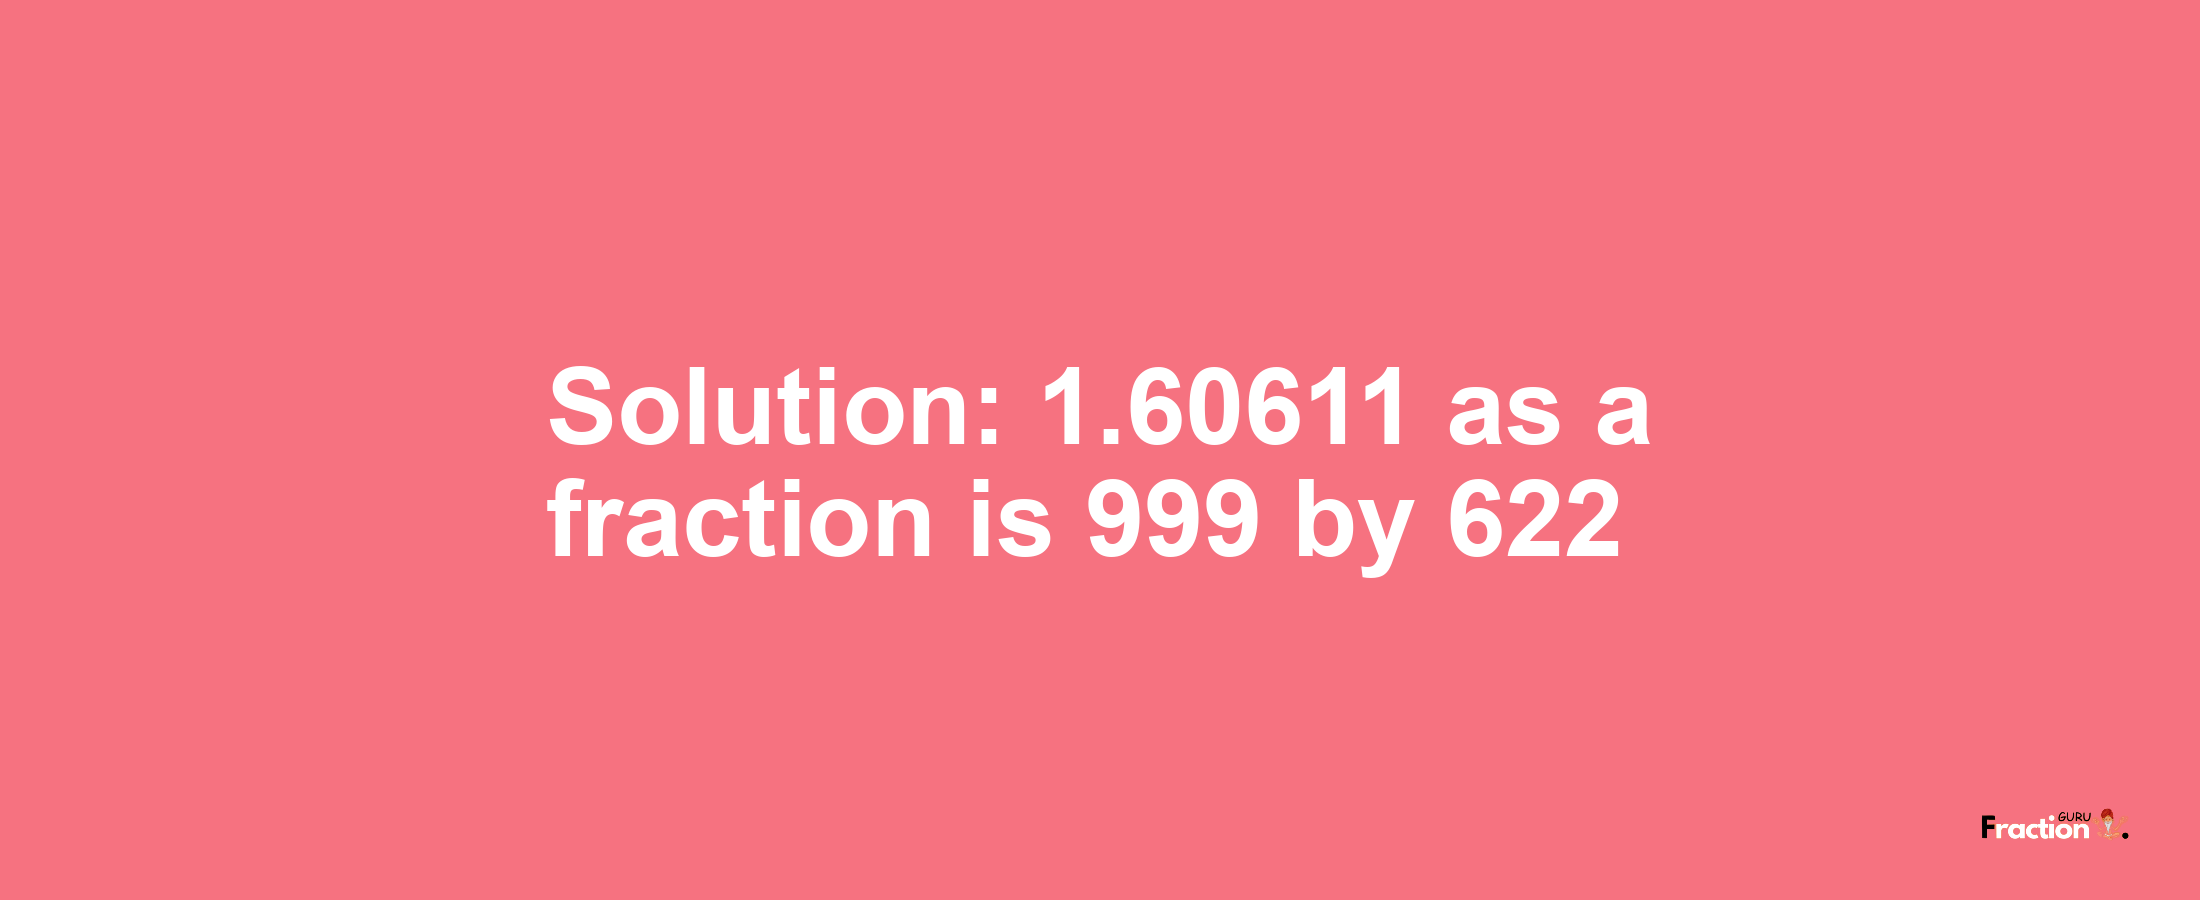 Solution:1.60611 as a fraction is 999/622